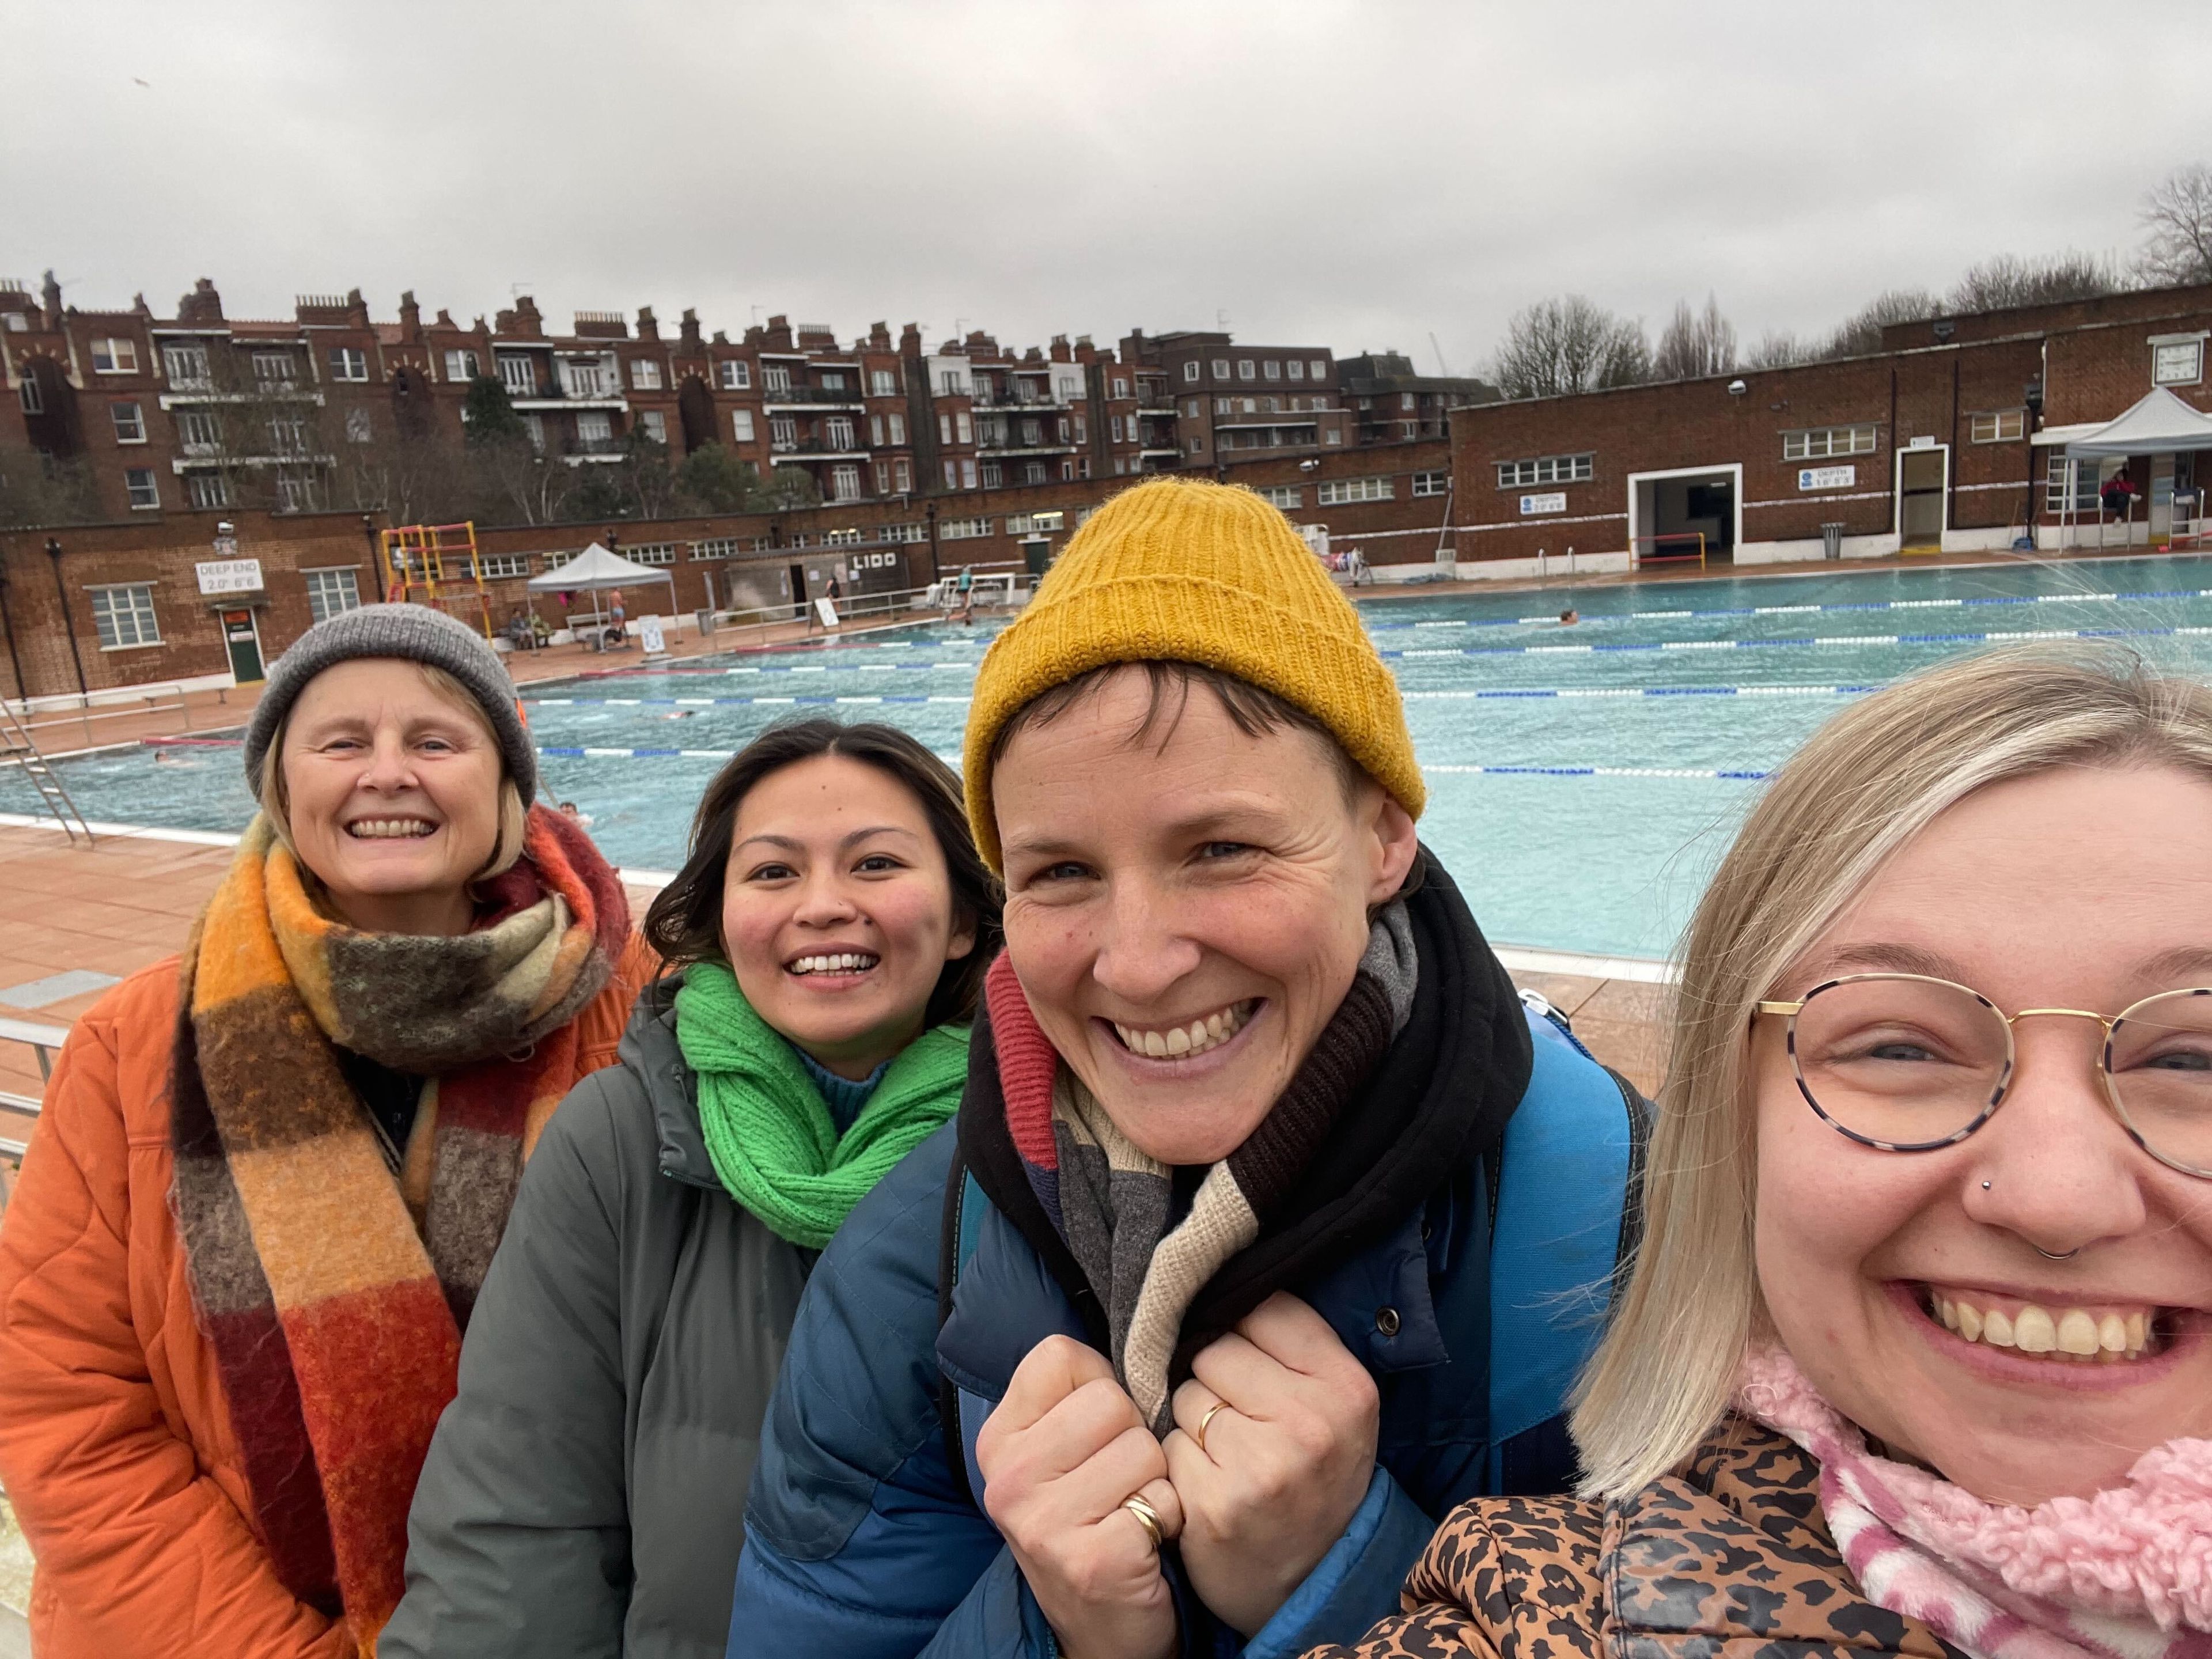 The team in Parliament Hill Lido